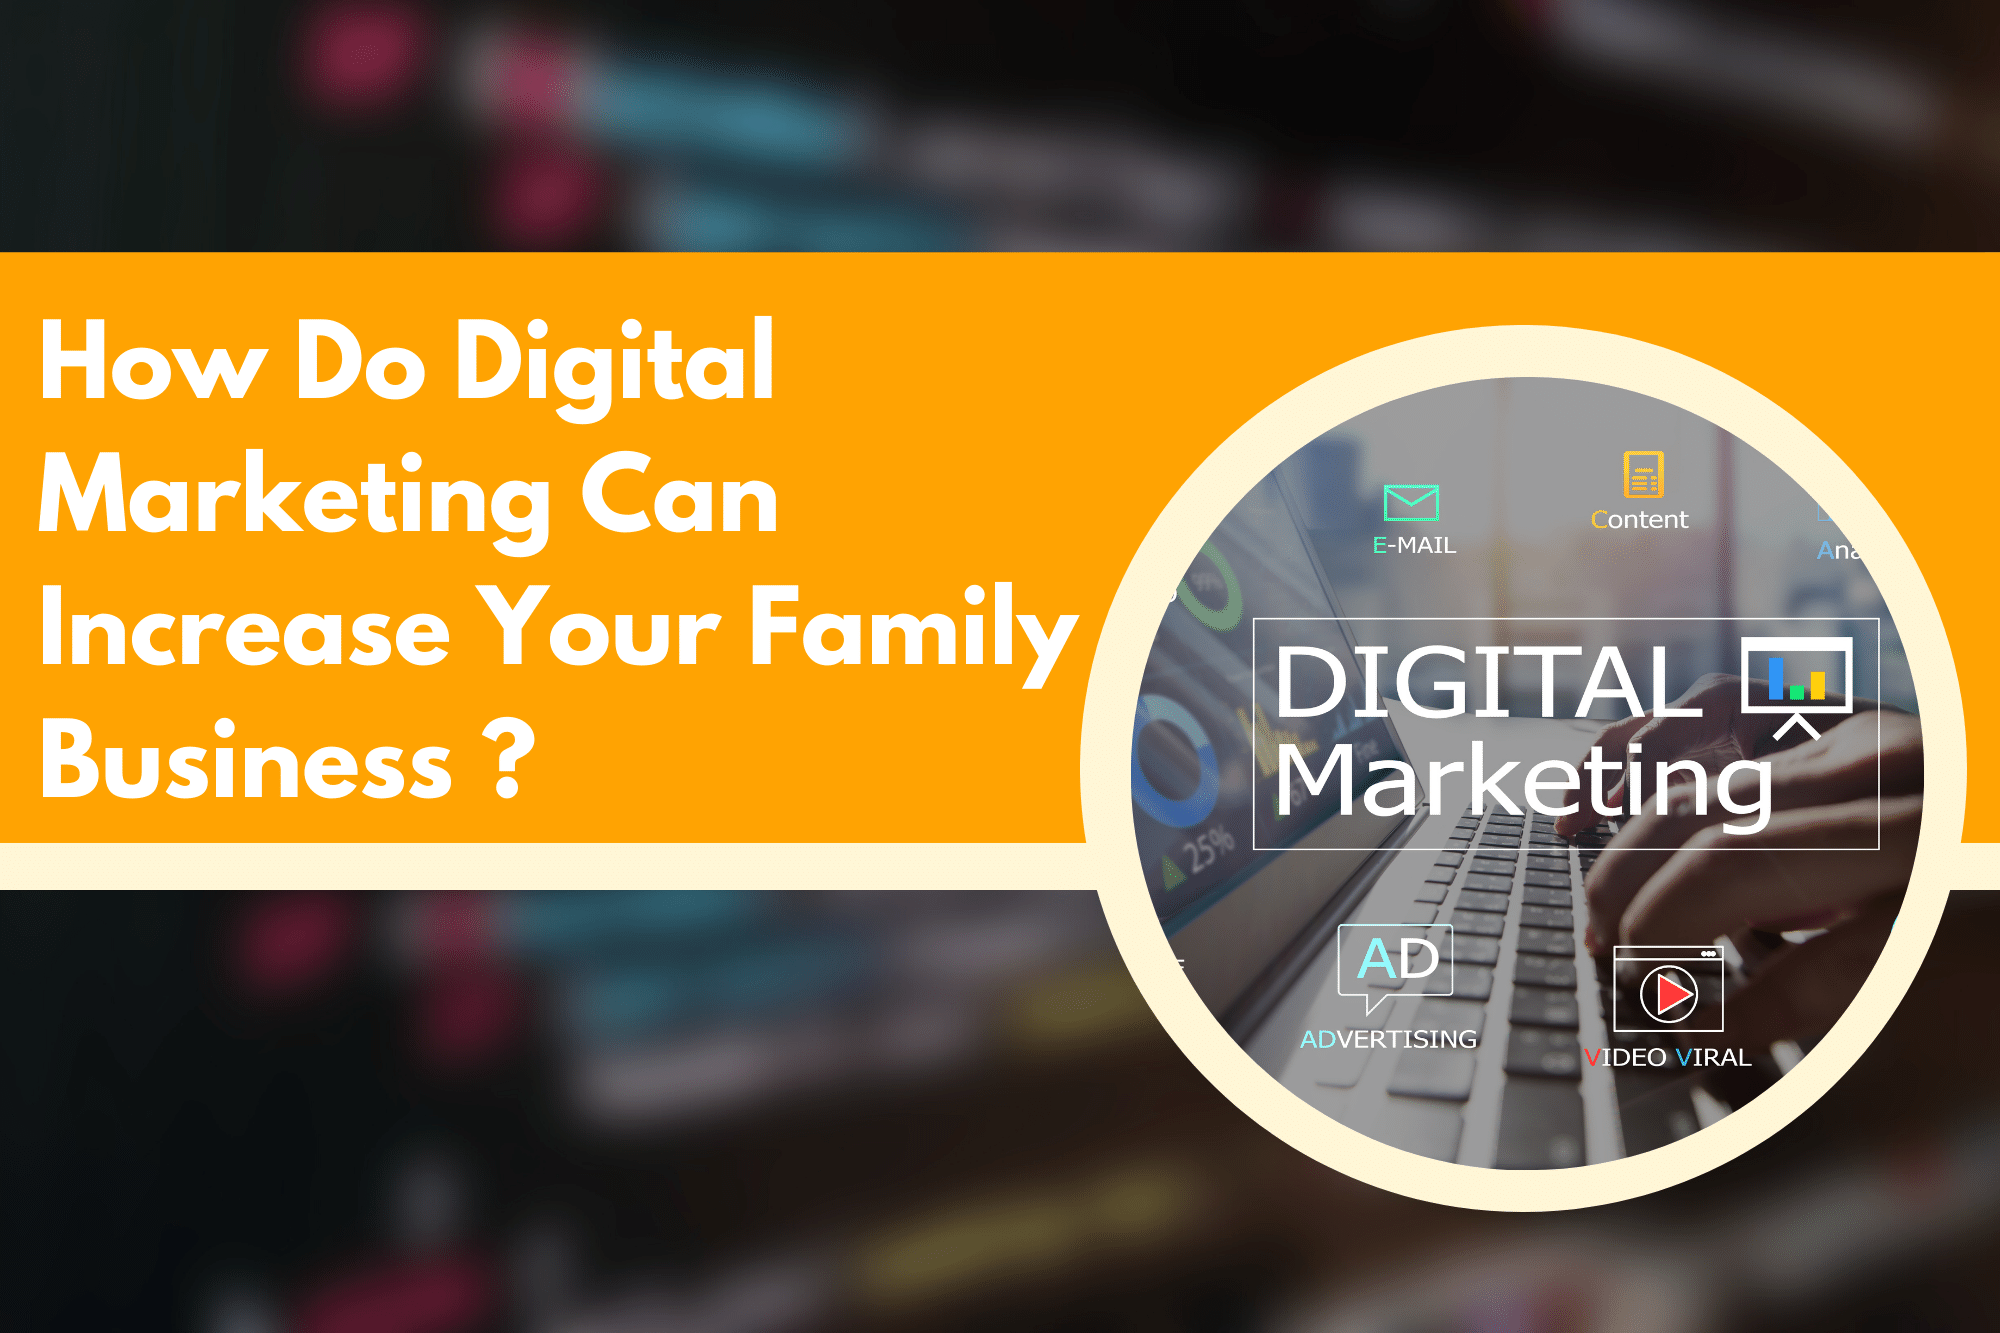 How Do Digital Marketing Can Increase Your Family Business